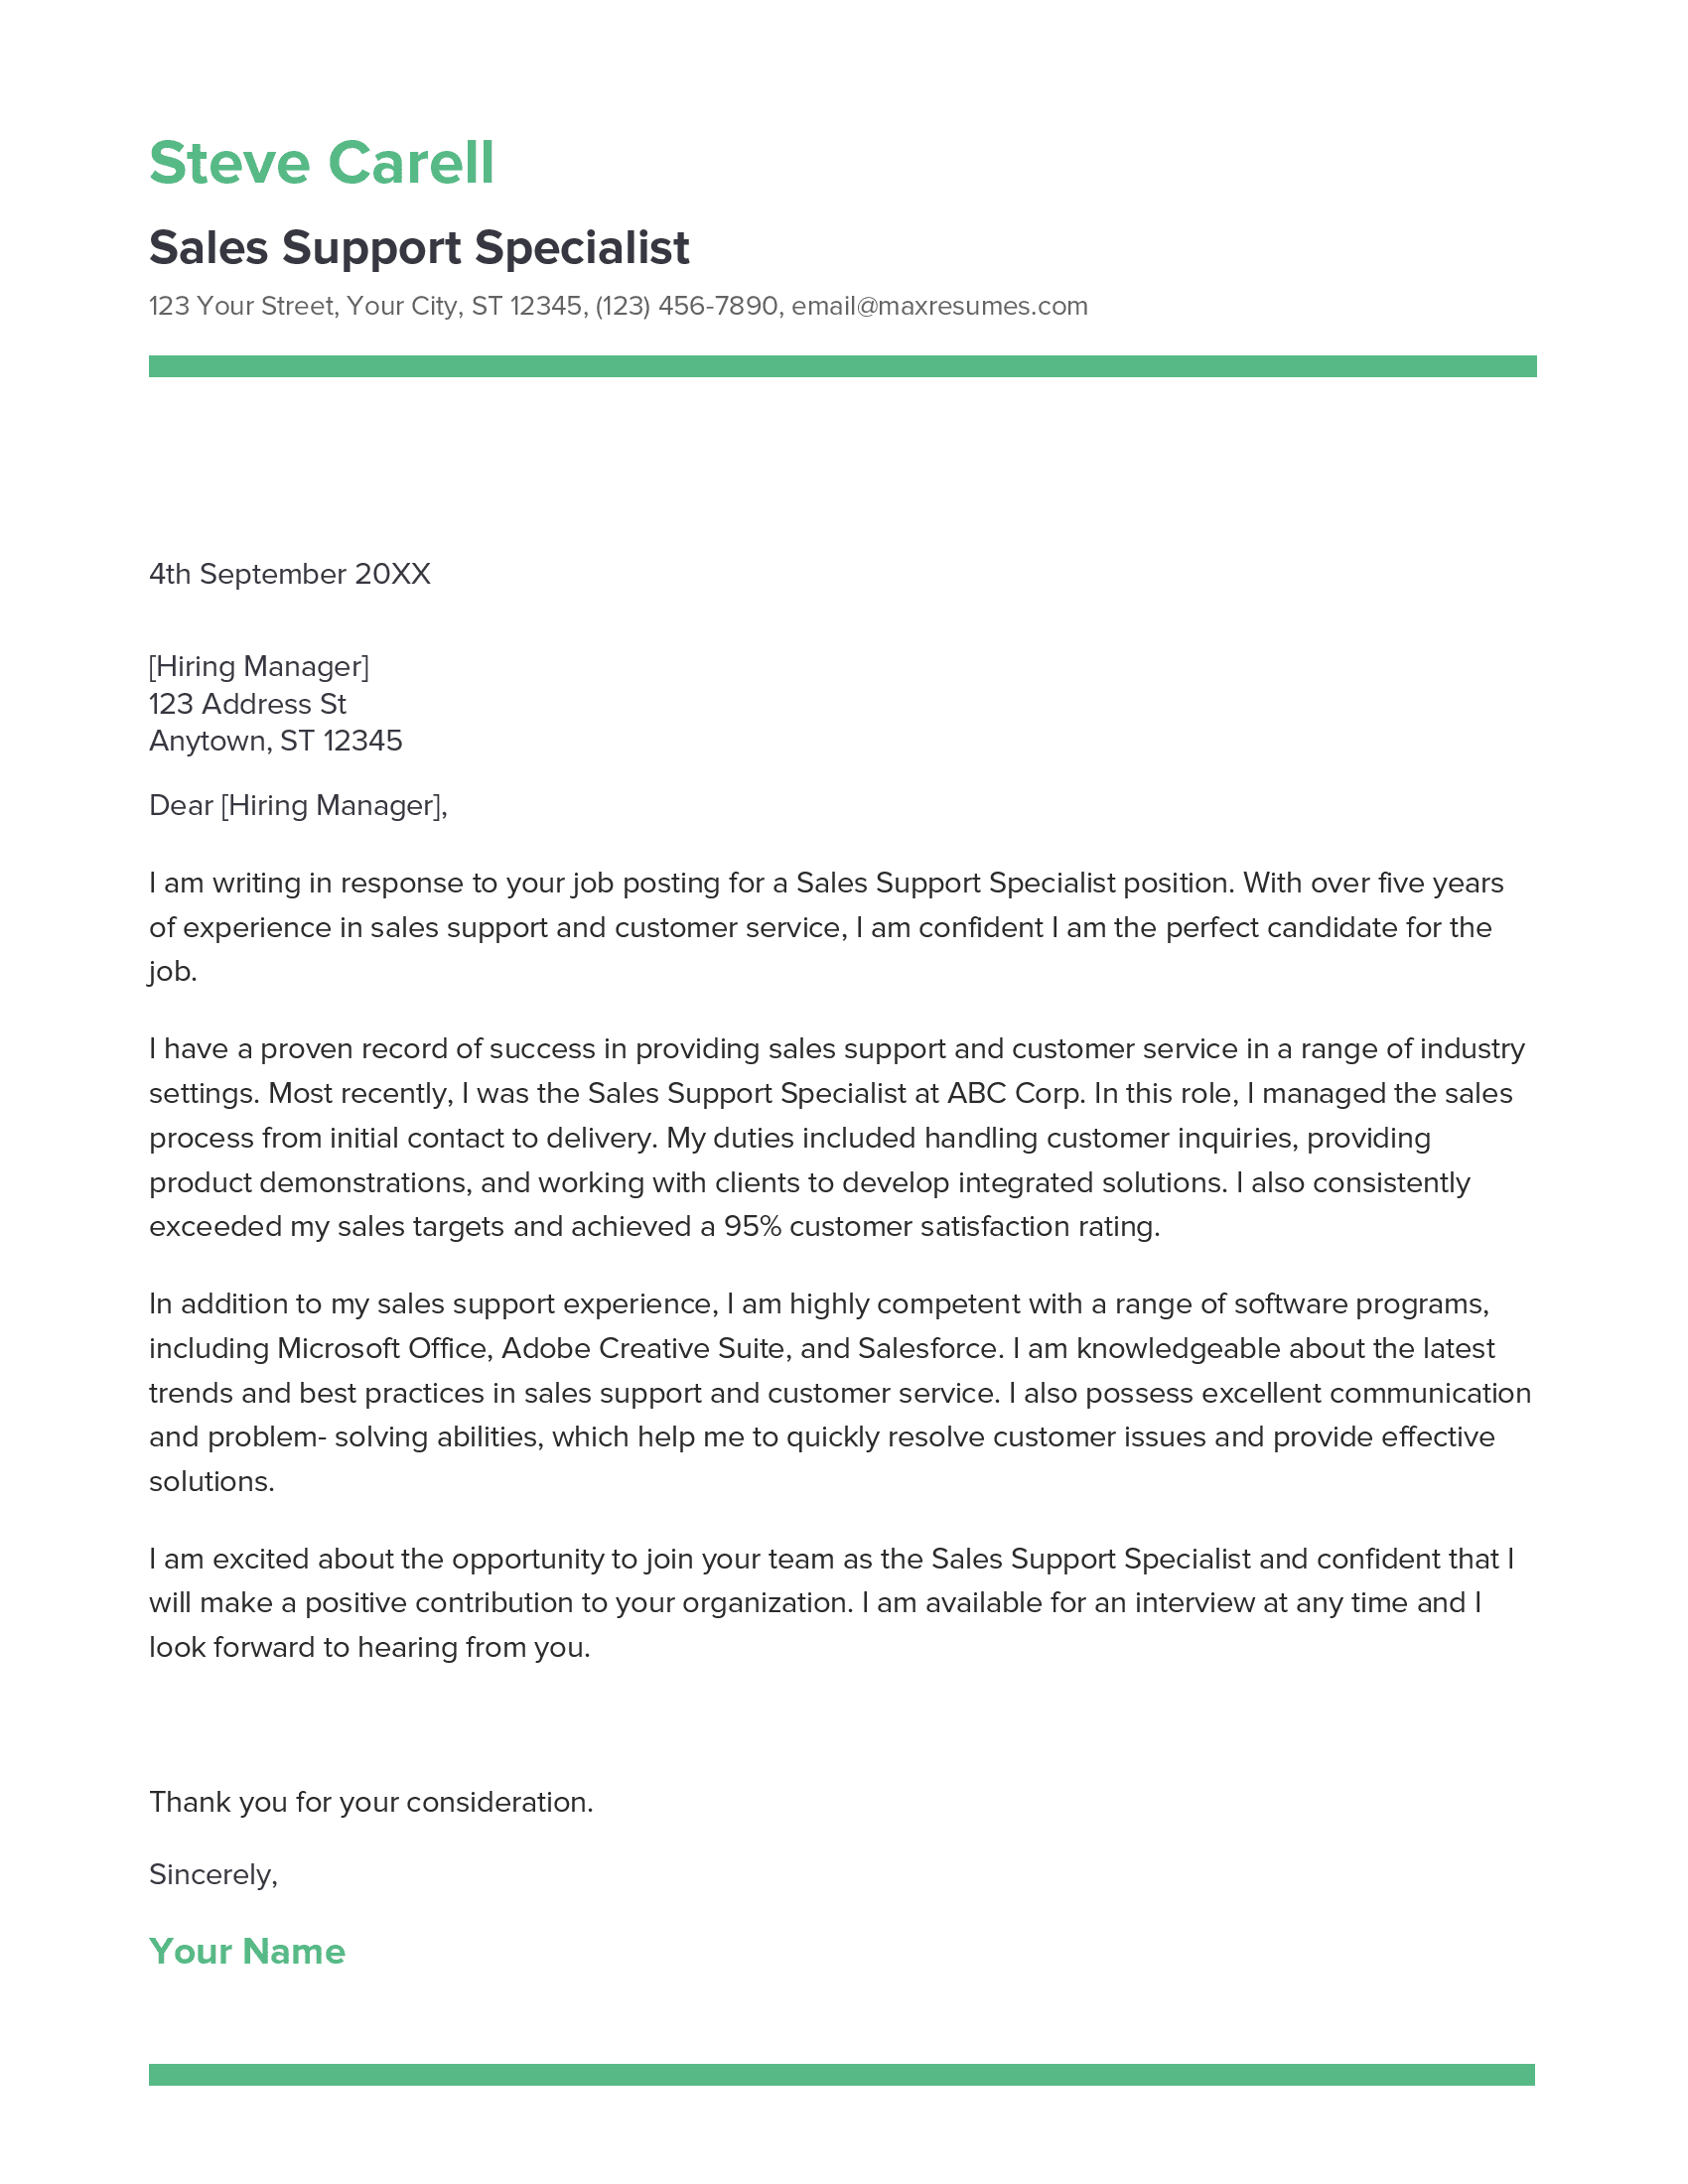 Sales Support Specialist Cover Letter Example